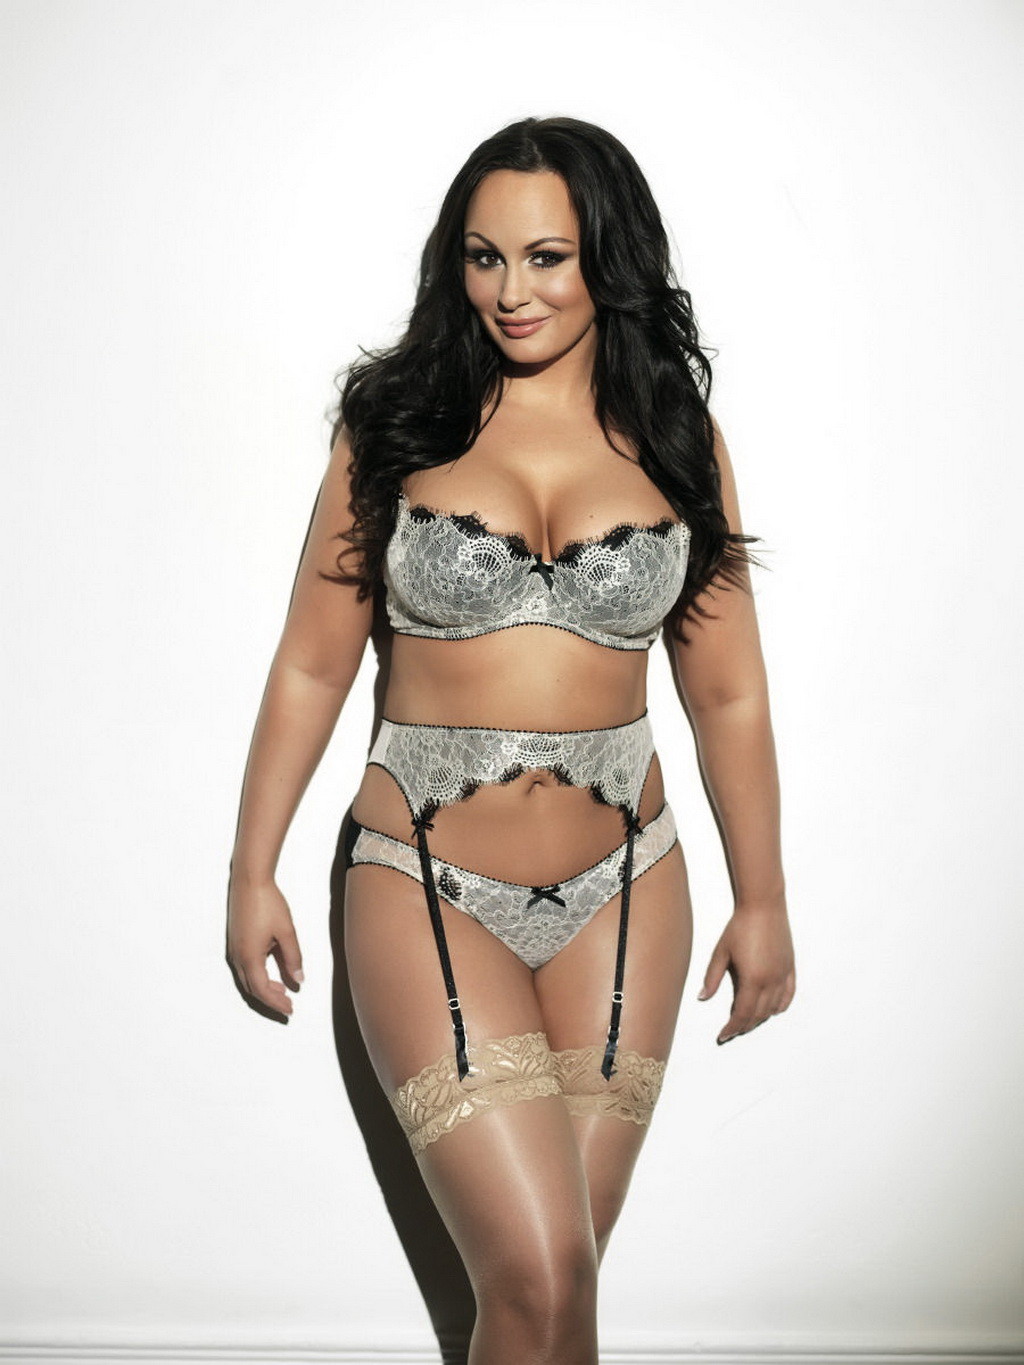 Chanelle Hayes showing off her big boobs in Nuts Magazine photoshoot